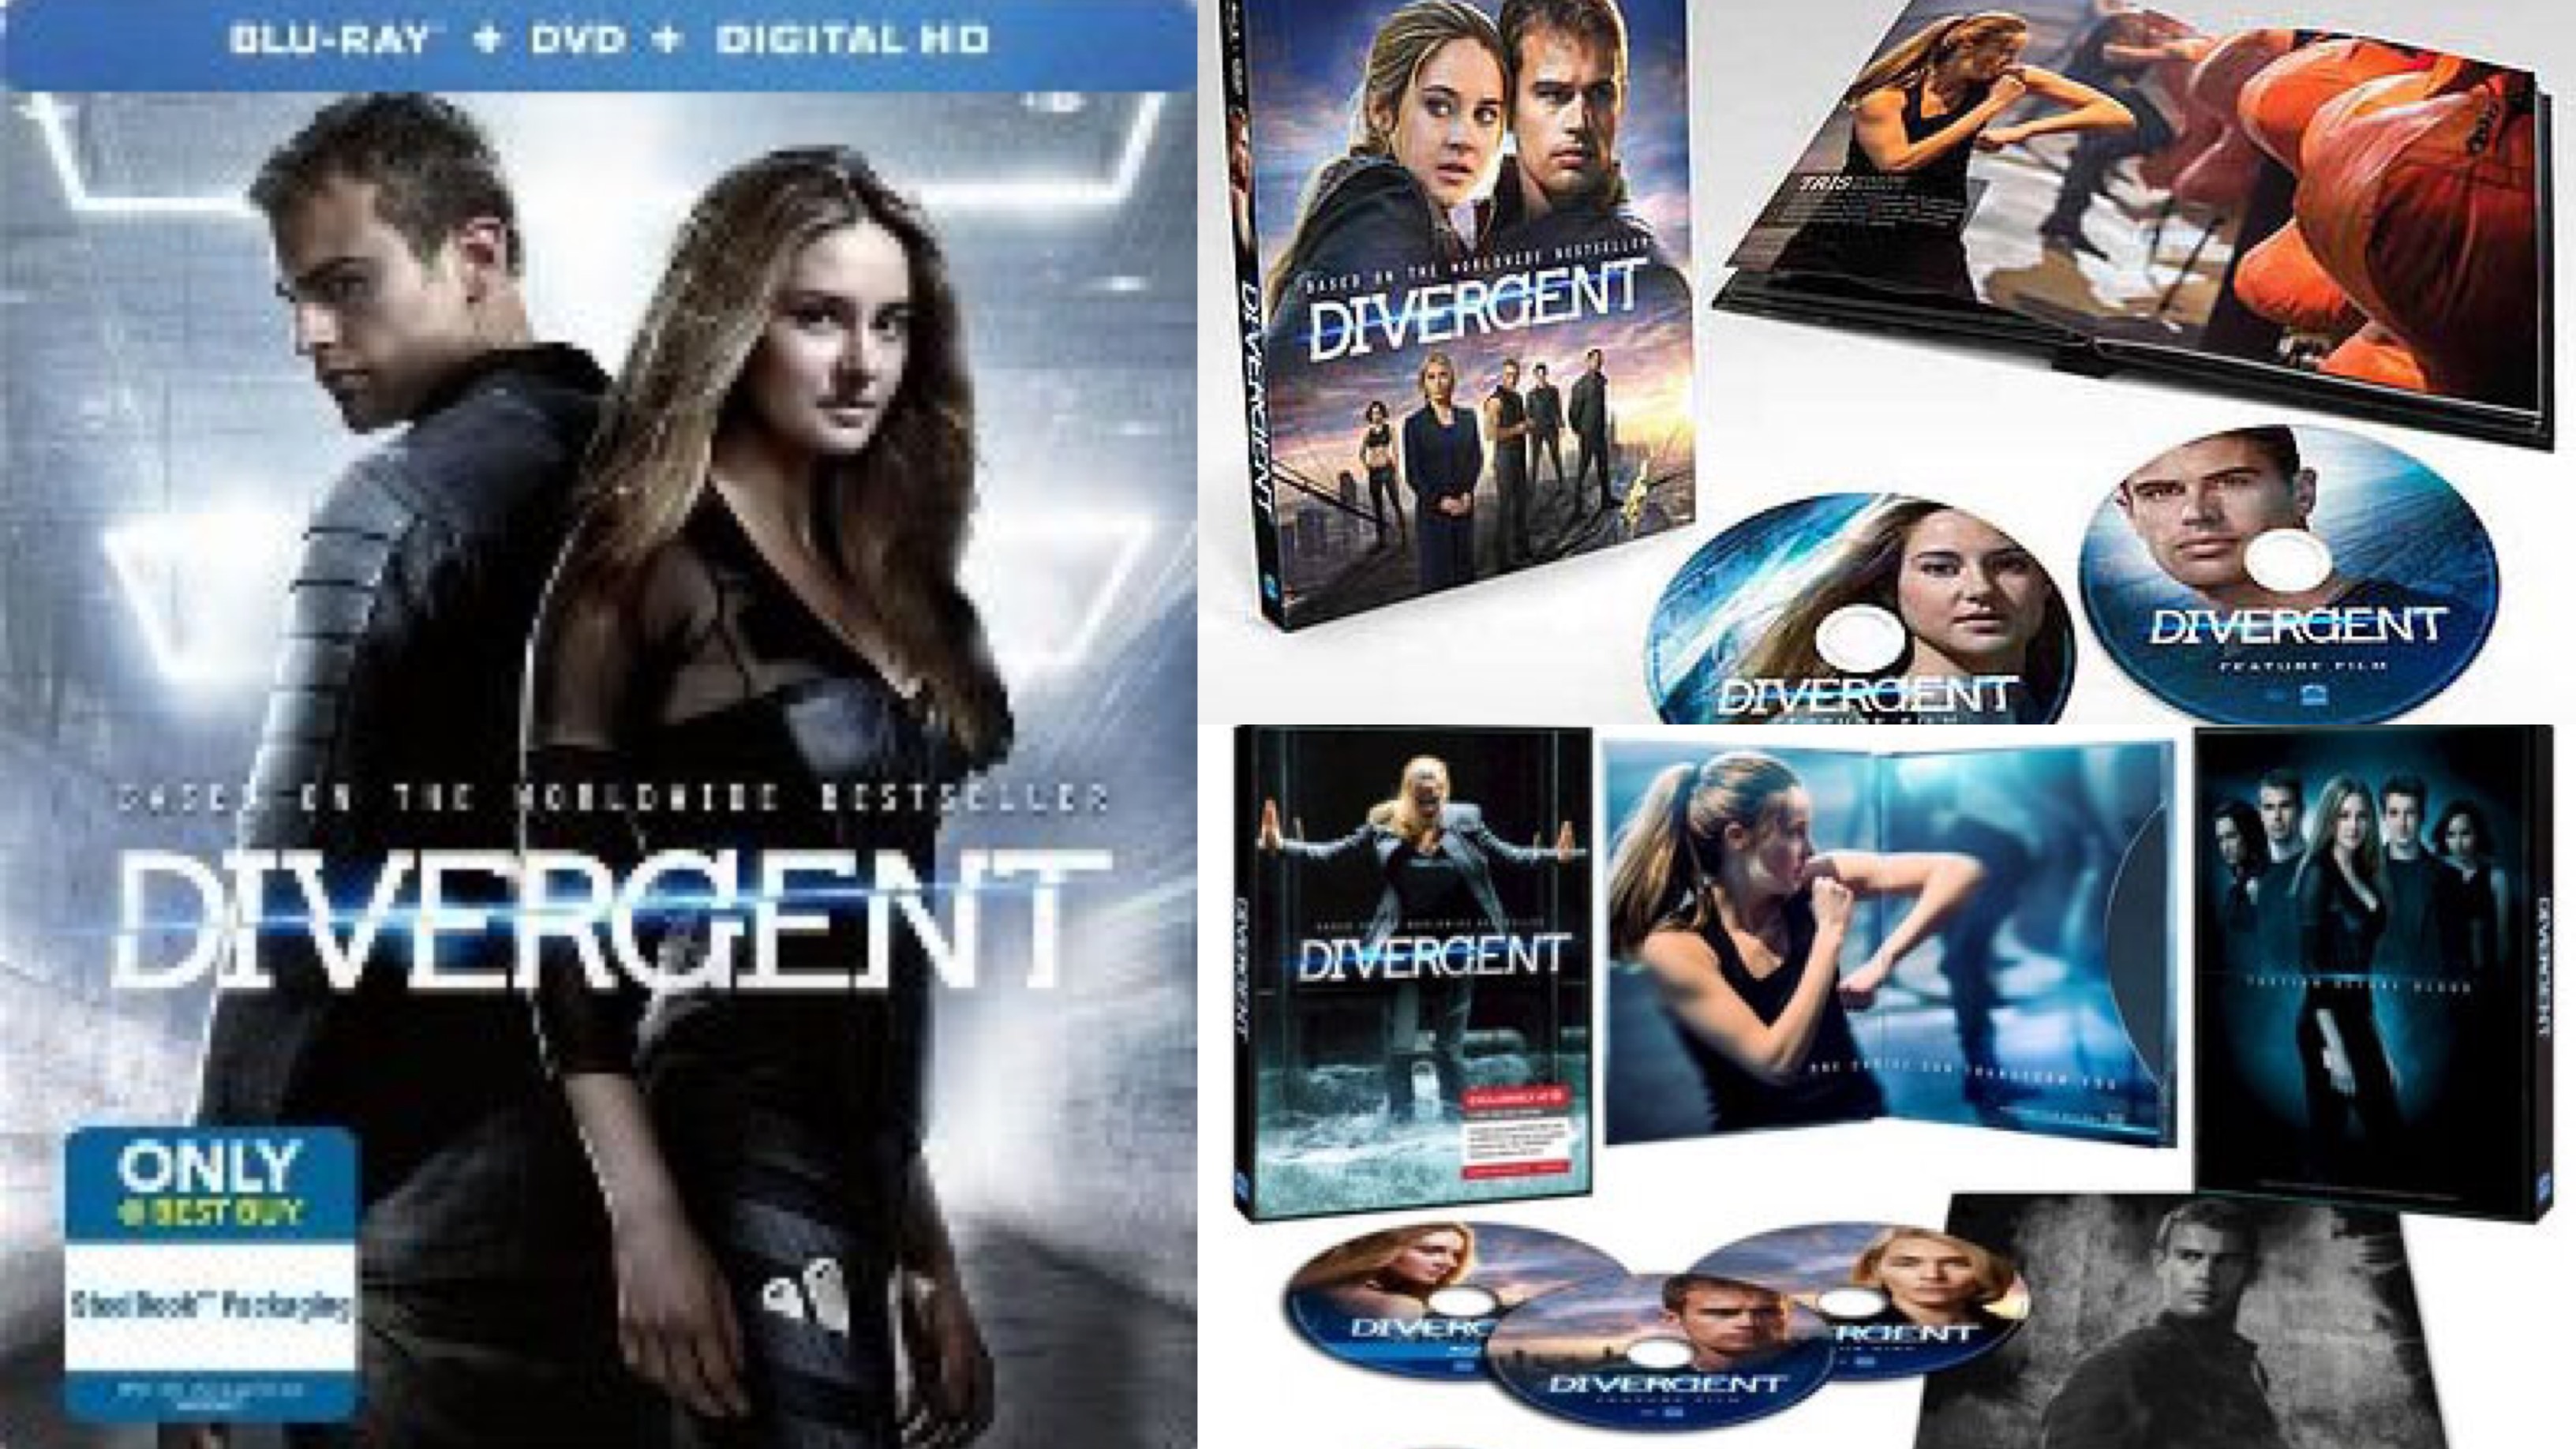 Guide: ‘Divergent’ Blu-ray Exclusive Releases From Retailers